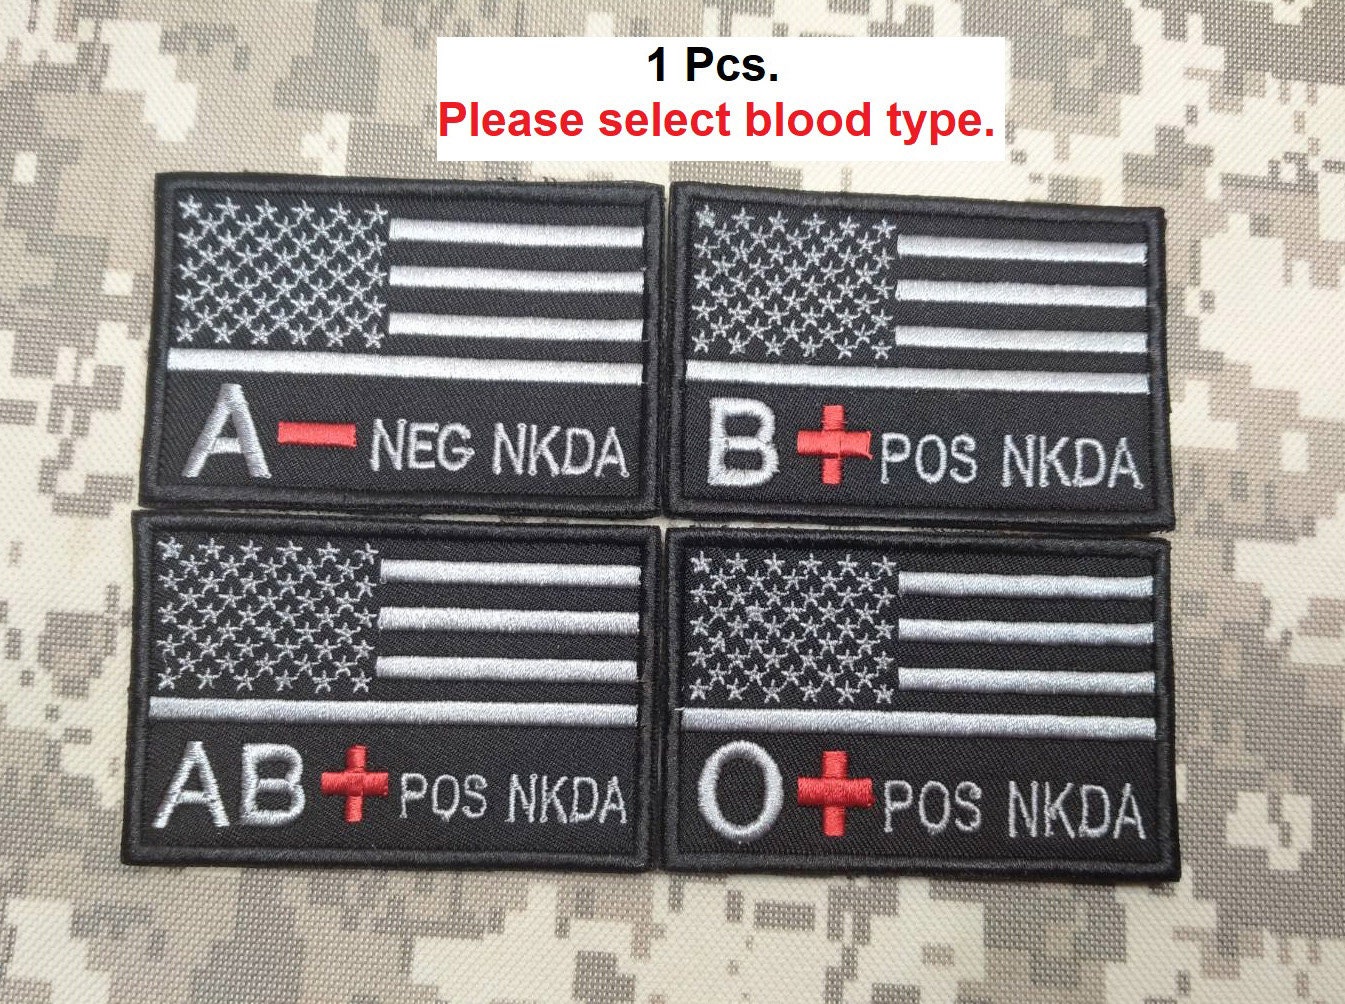 1 Pcs. U S A Flag Patch and Blood Type Patch A B O AB POS N E G NKDA Patch  Army Military Hook Backing or Sew on Patch Size 3 X 2 -  Israel